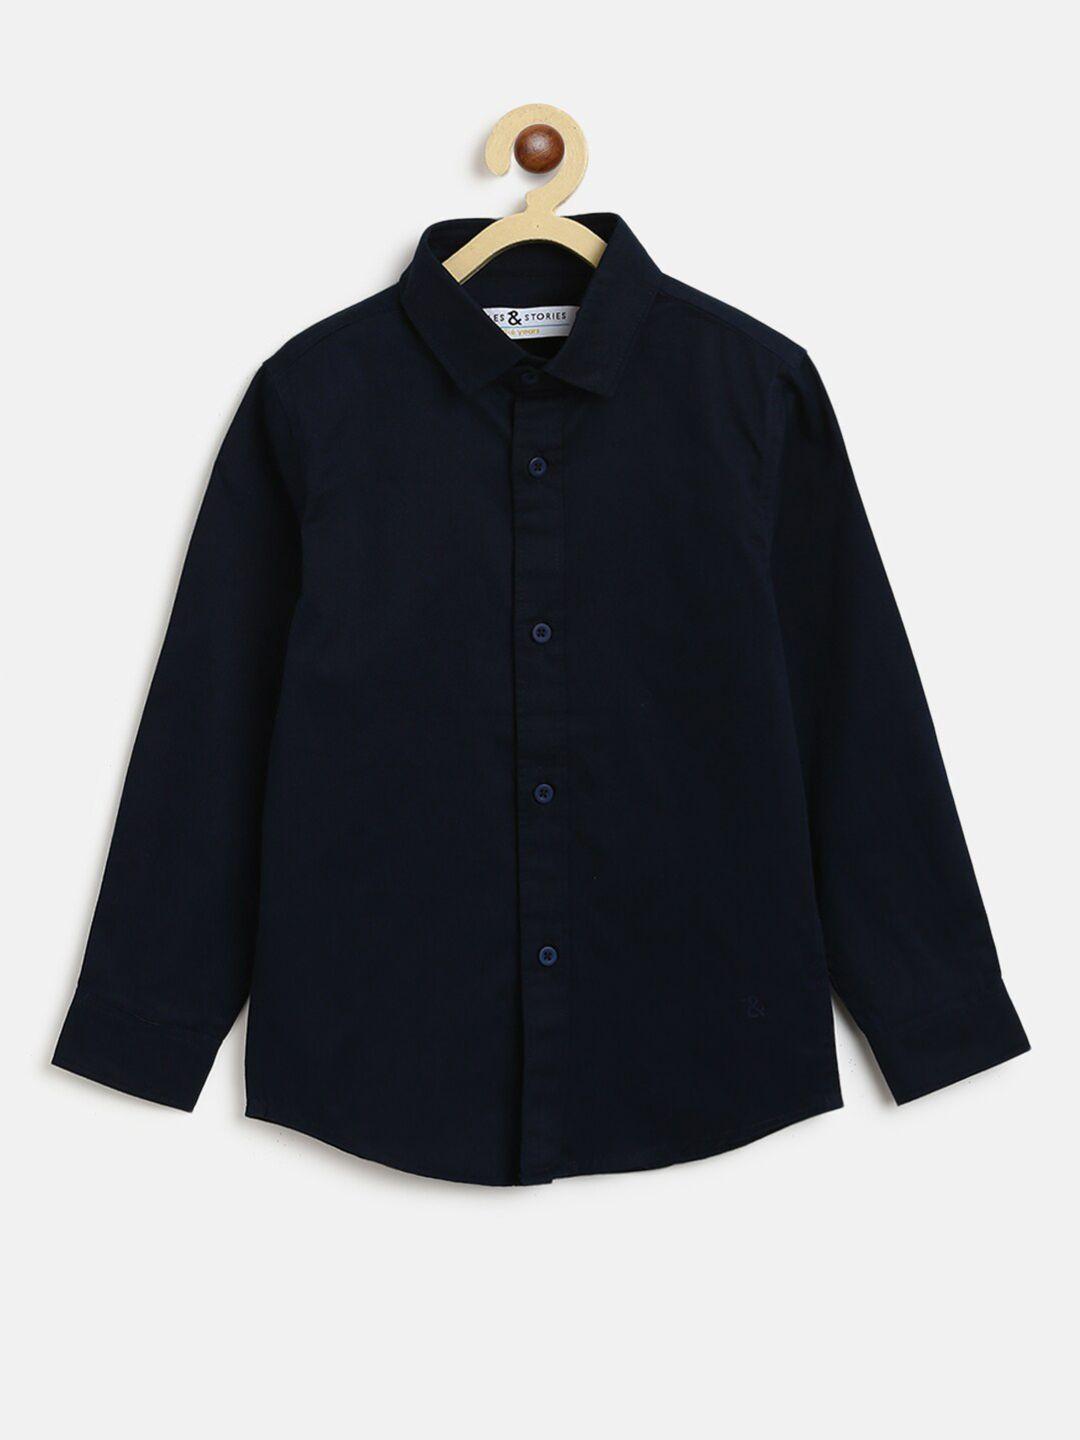 tales & stories boys navy blue casual shirt